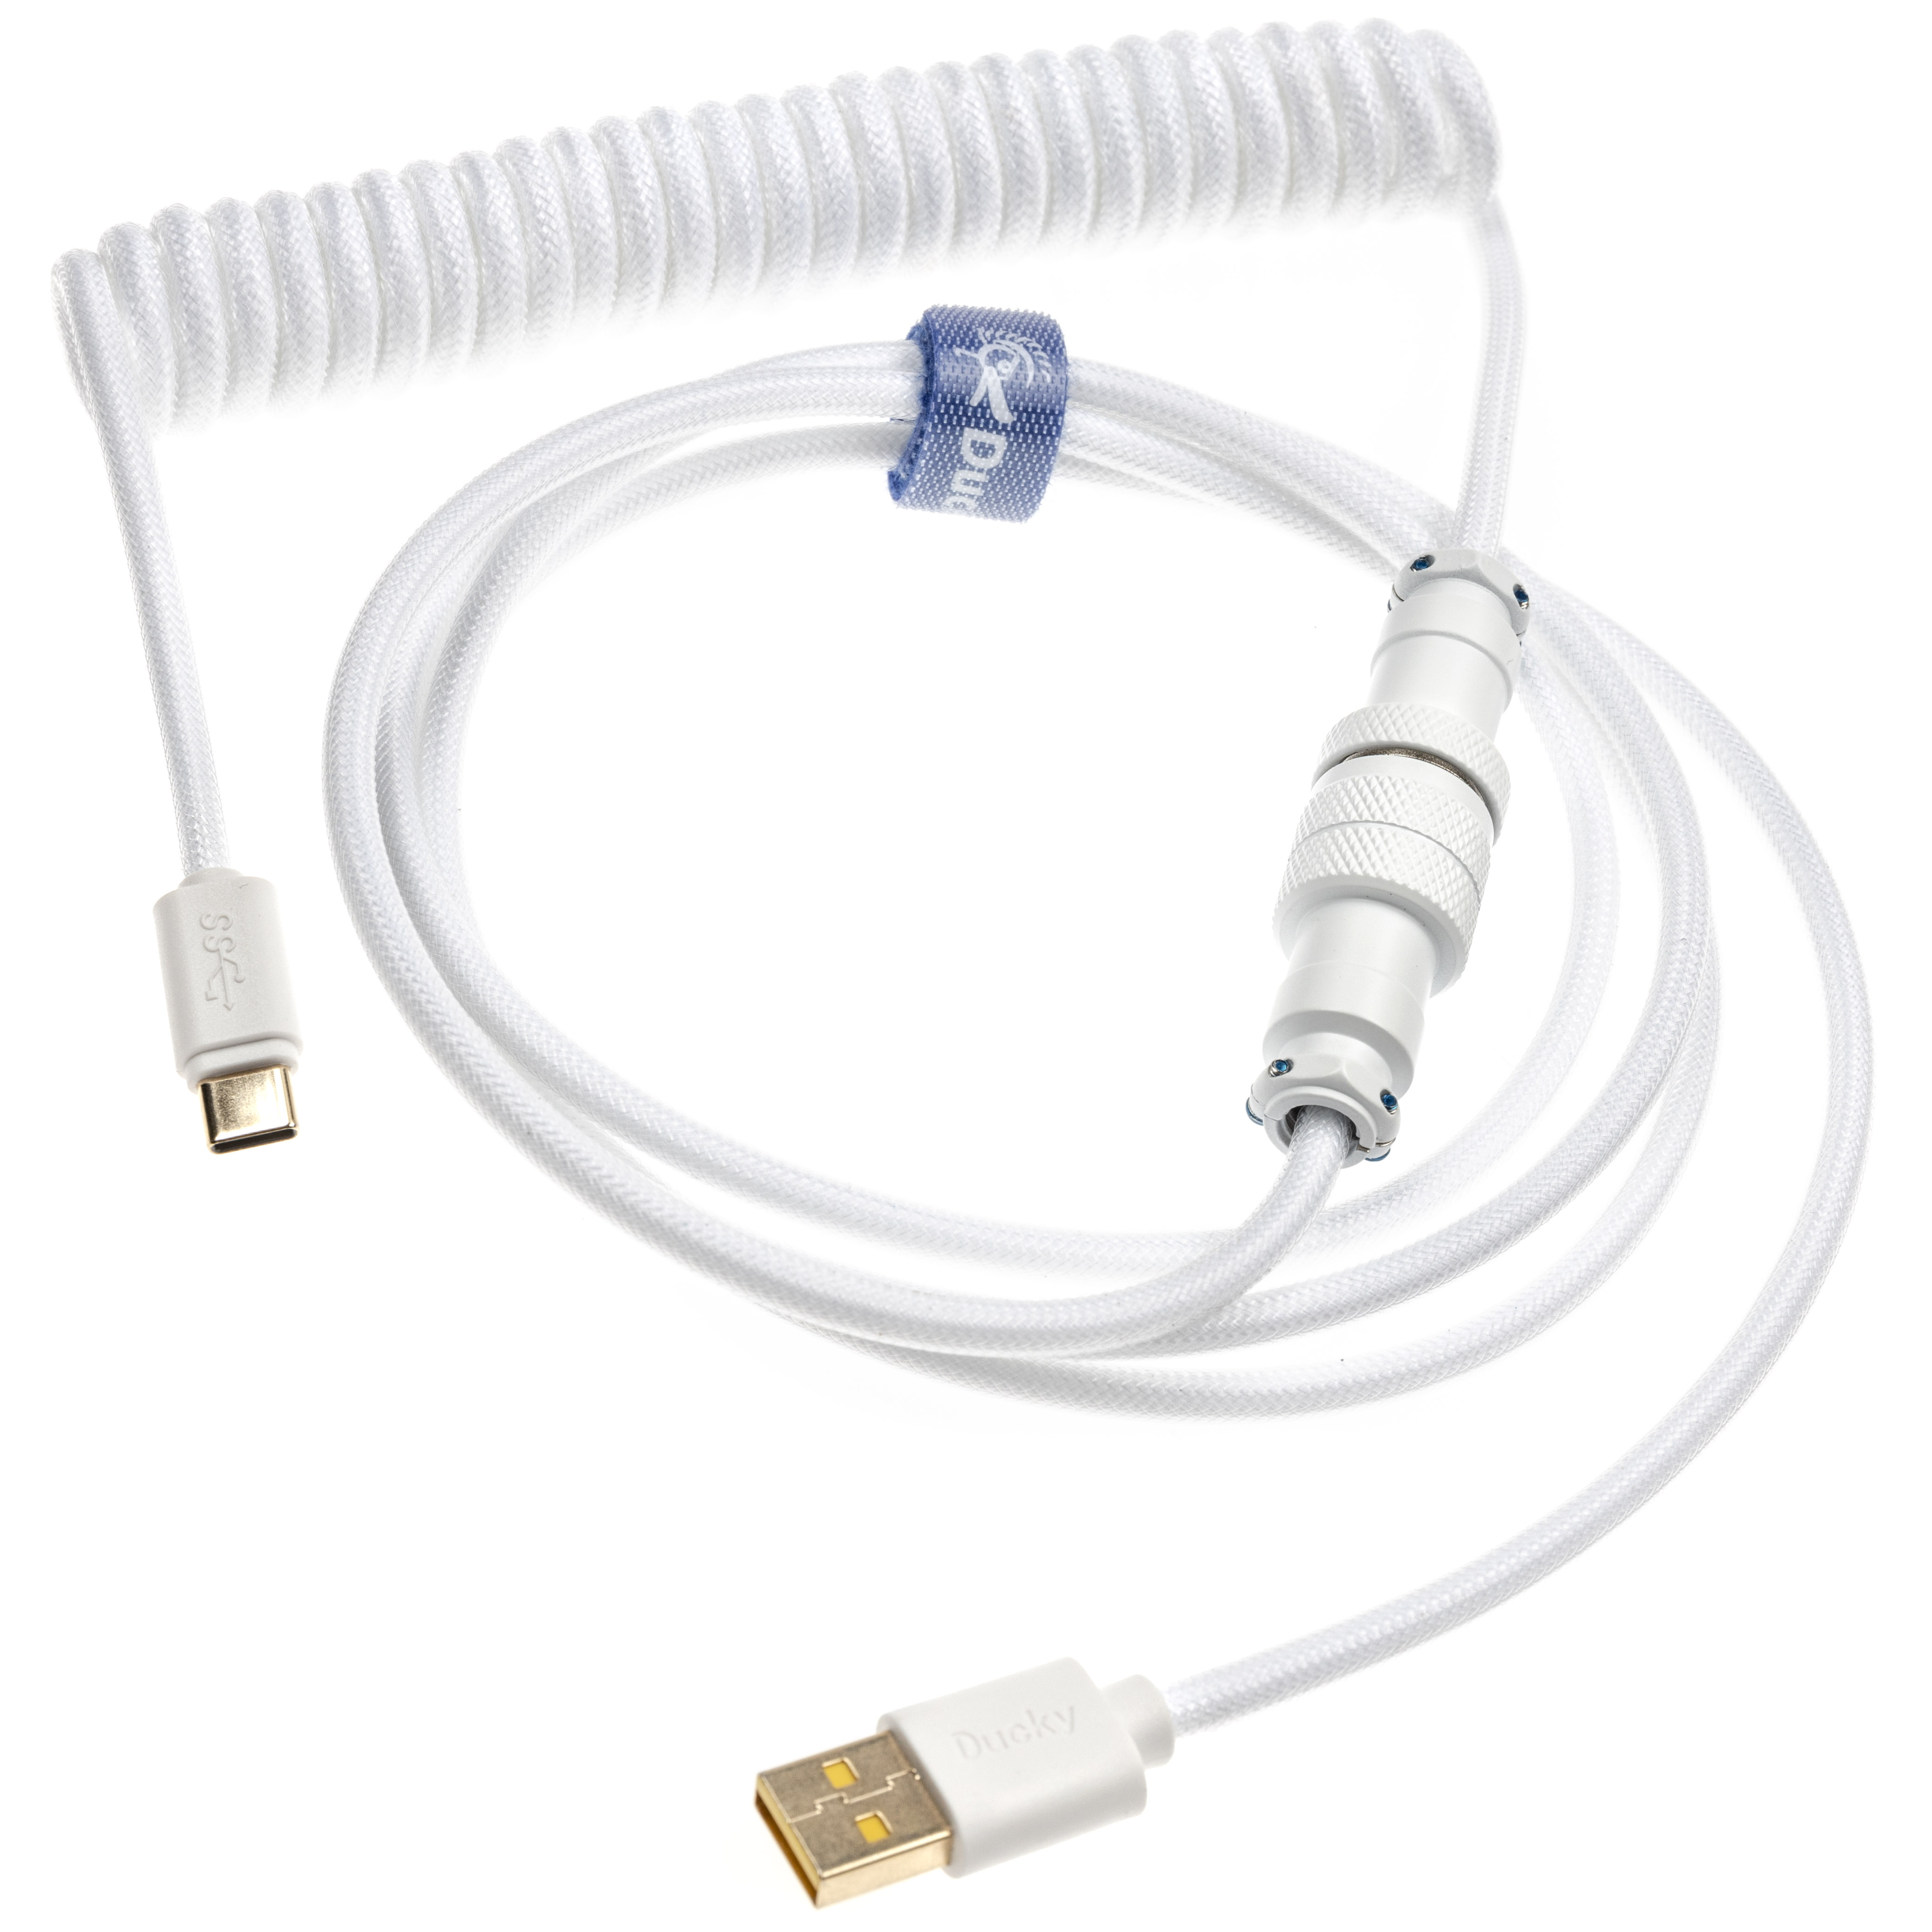 Ducky Keyboard Coiled Cable V2 Pure White